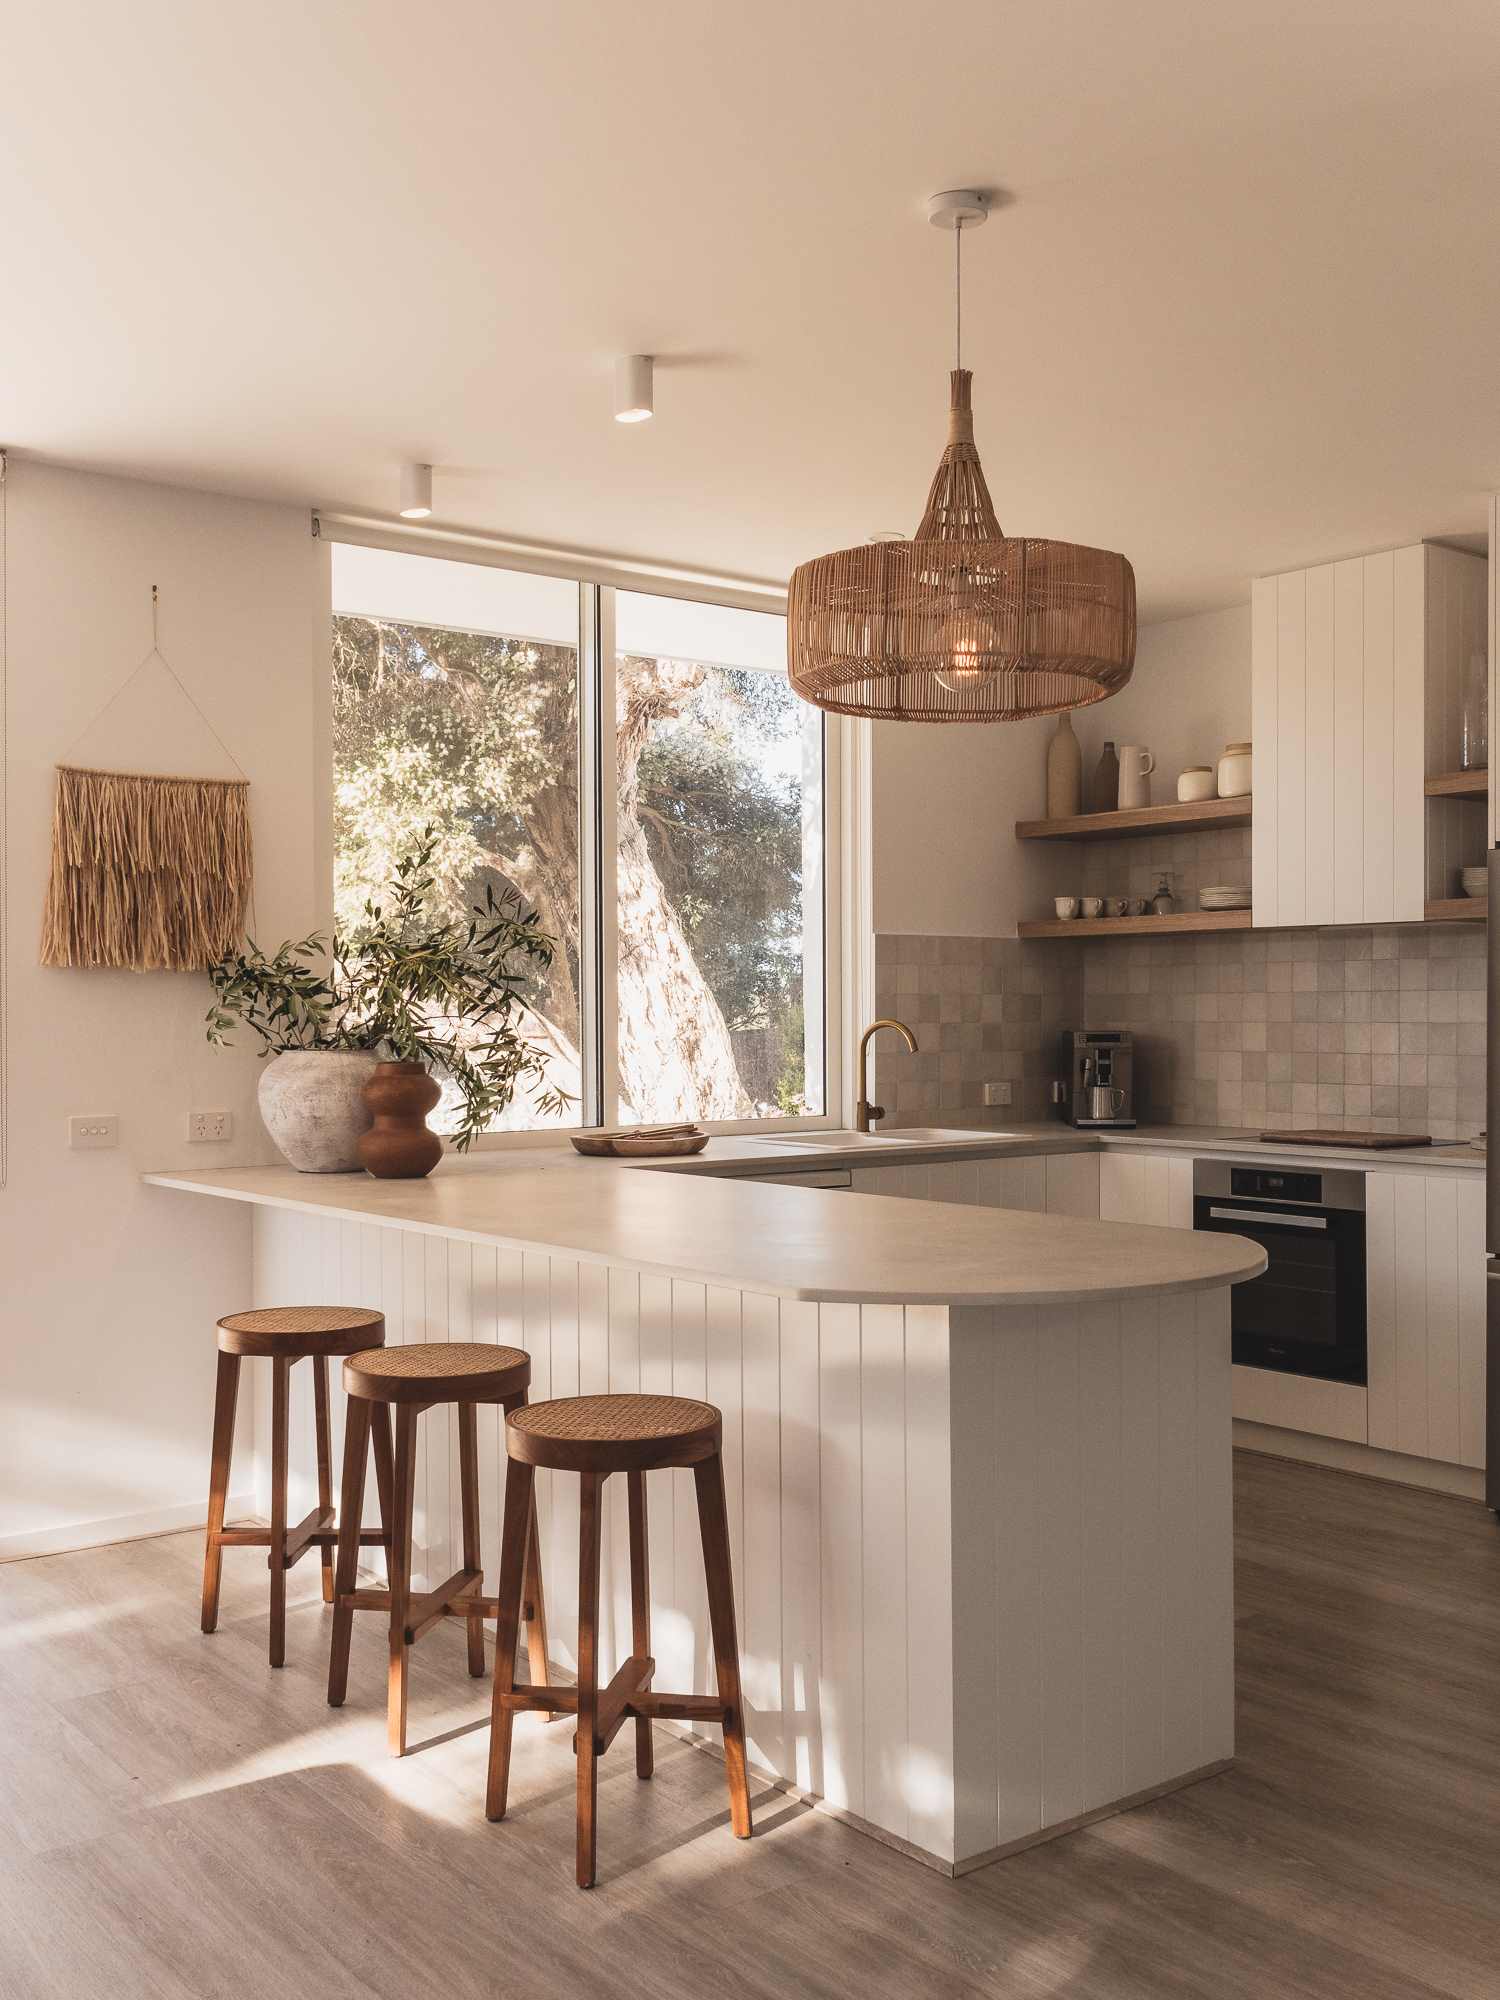 5 top tips for kitchen styling